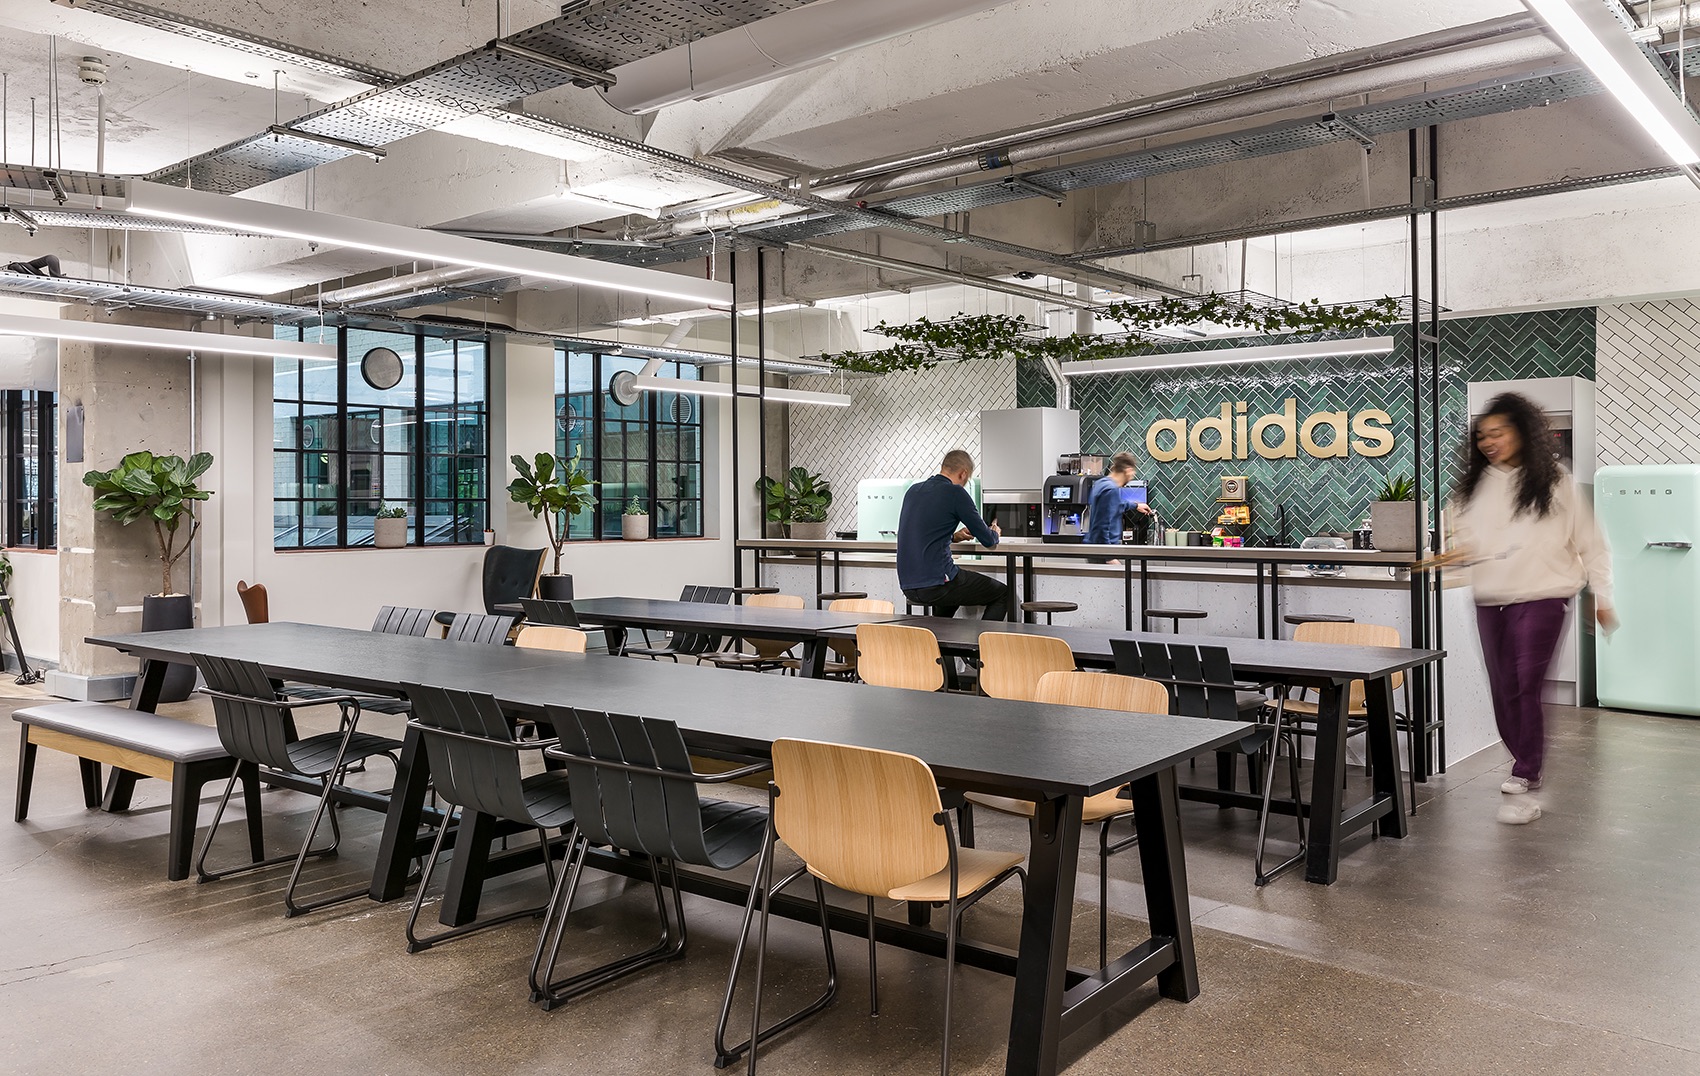 A Look Inside Adidas' Cool New London 